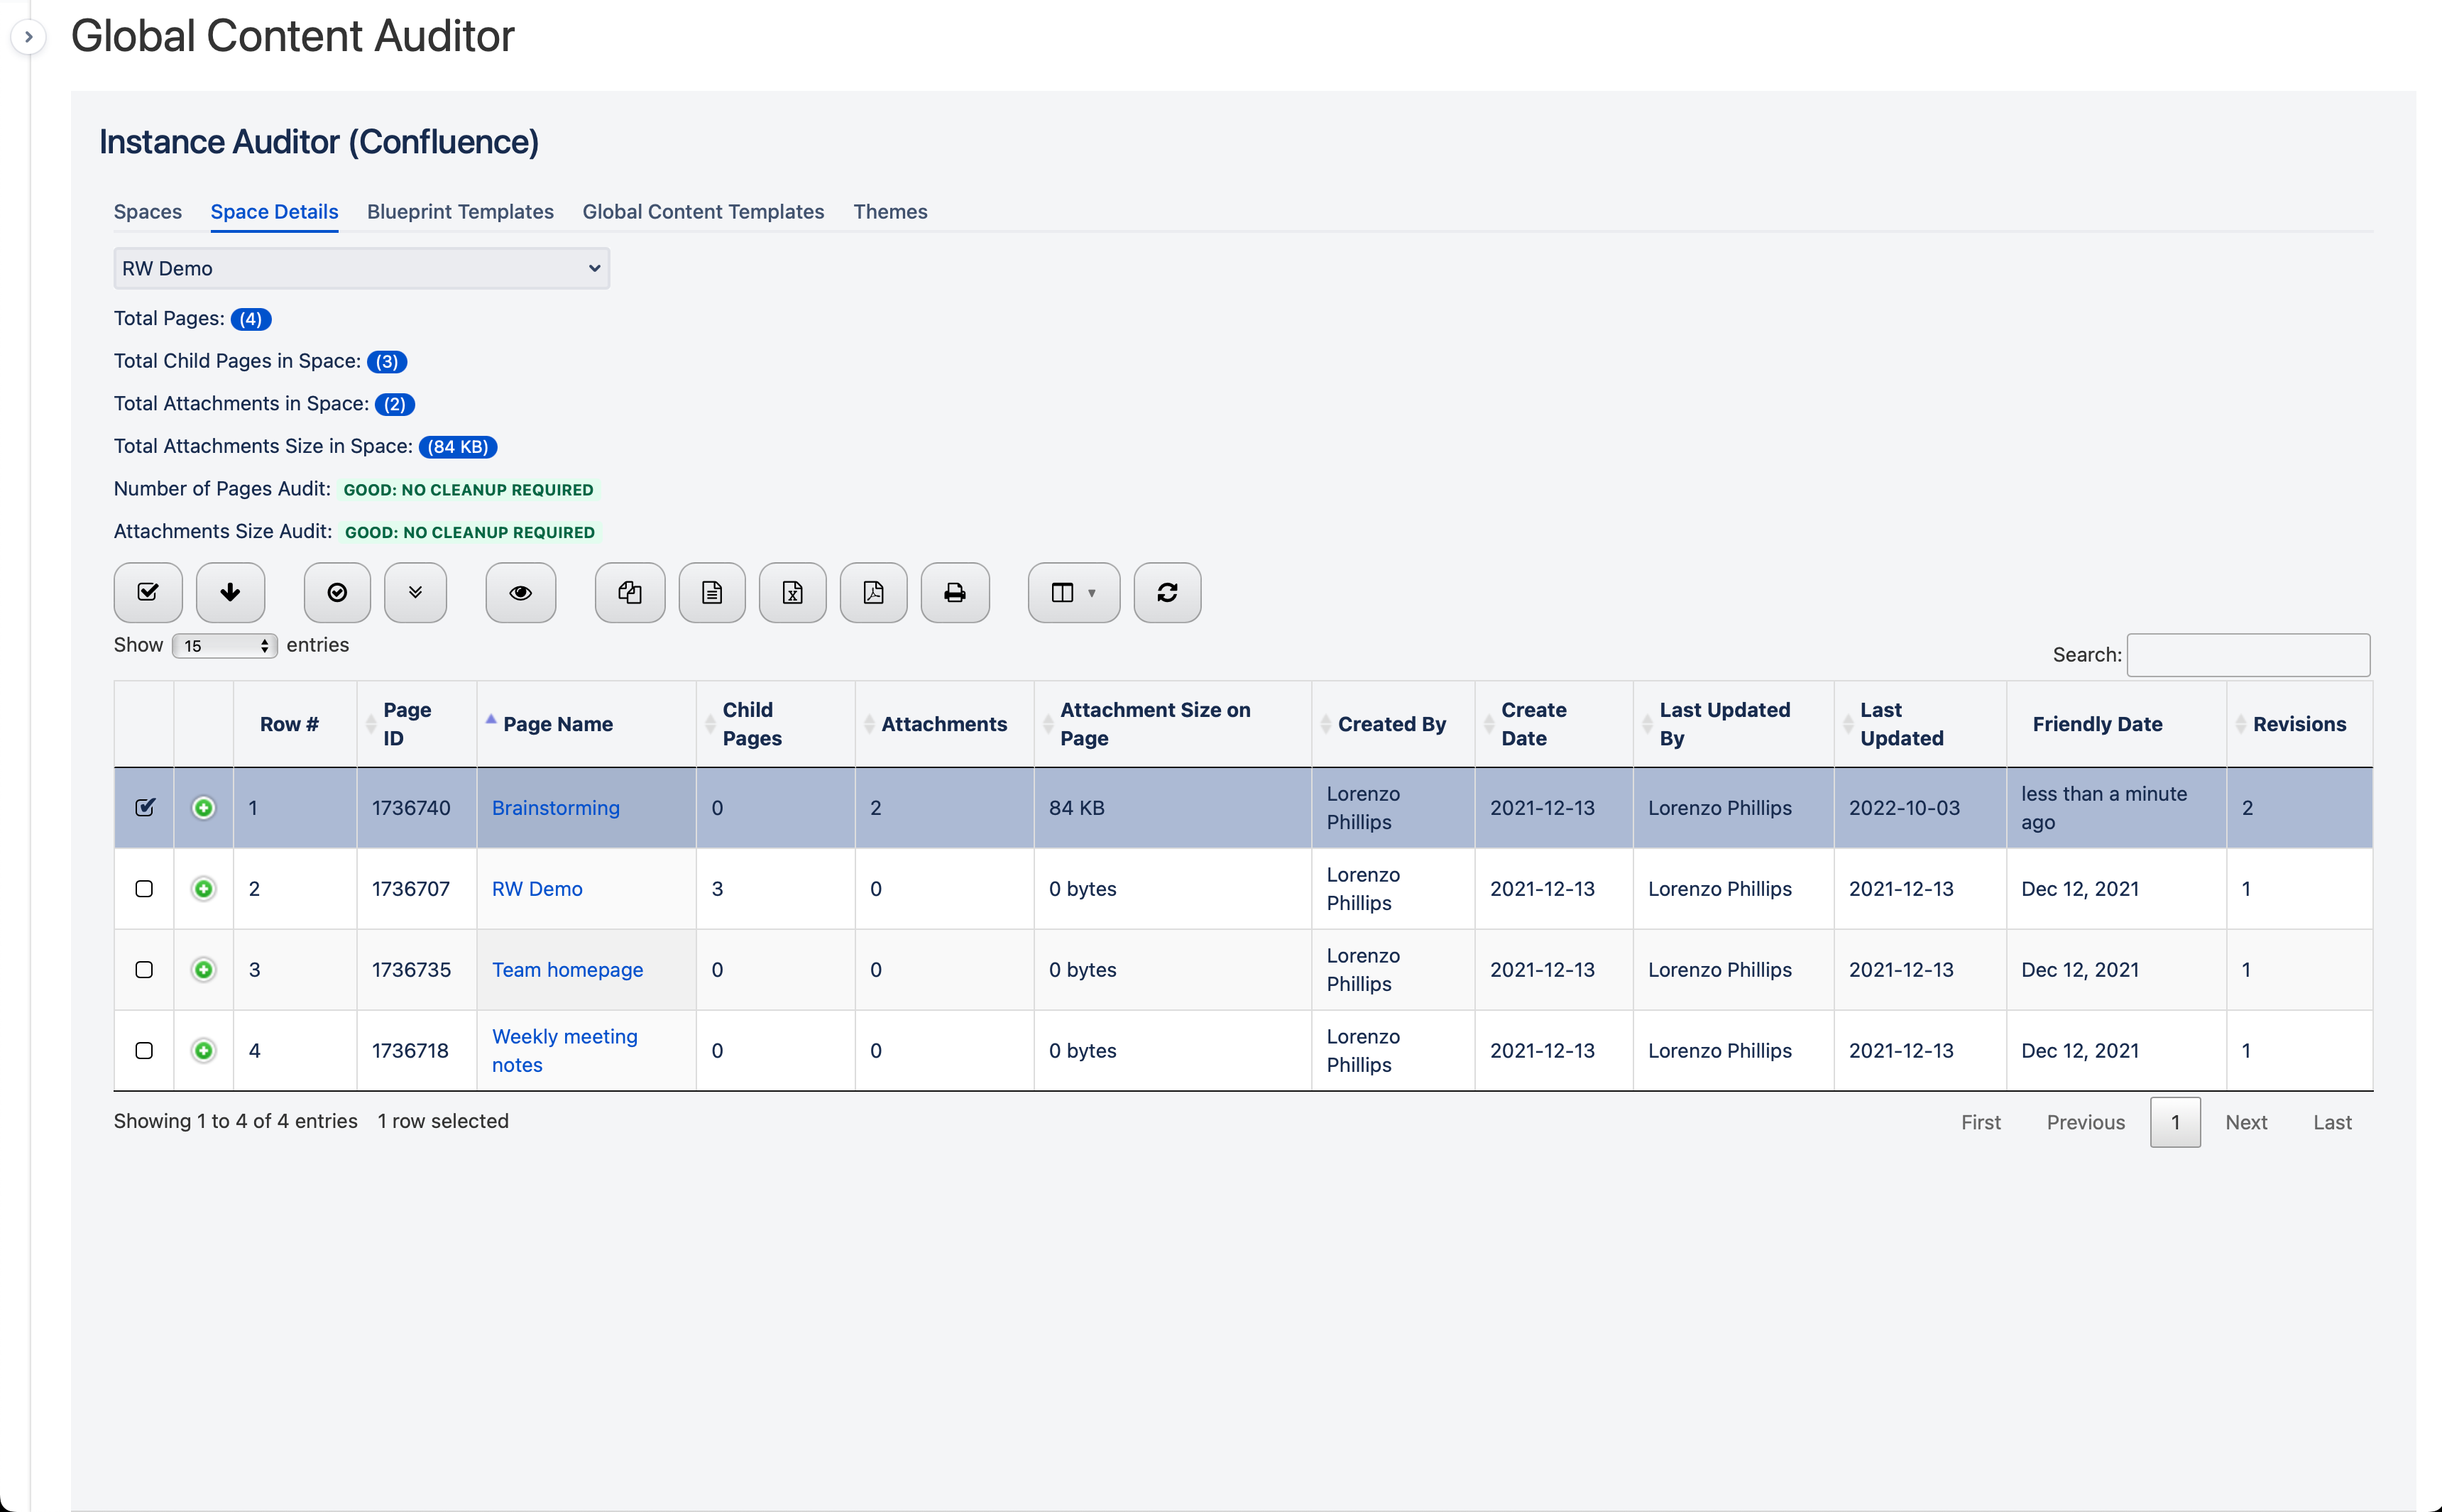 Instance Auditor (Confluence) - Space Details